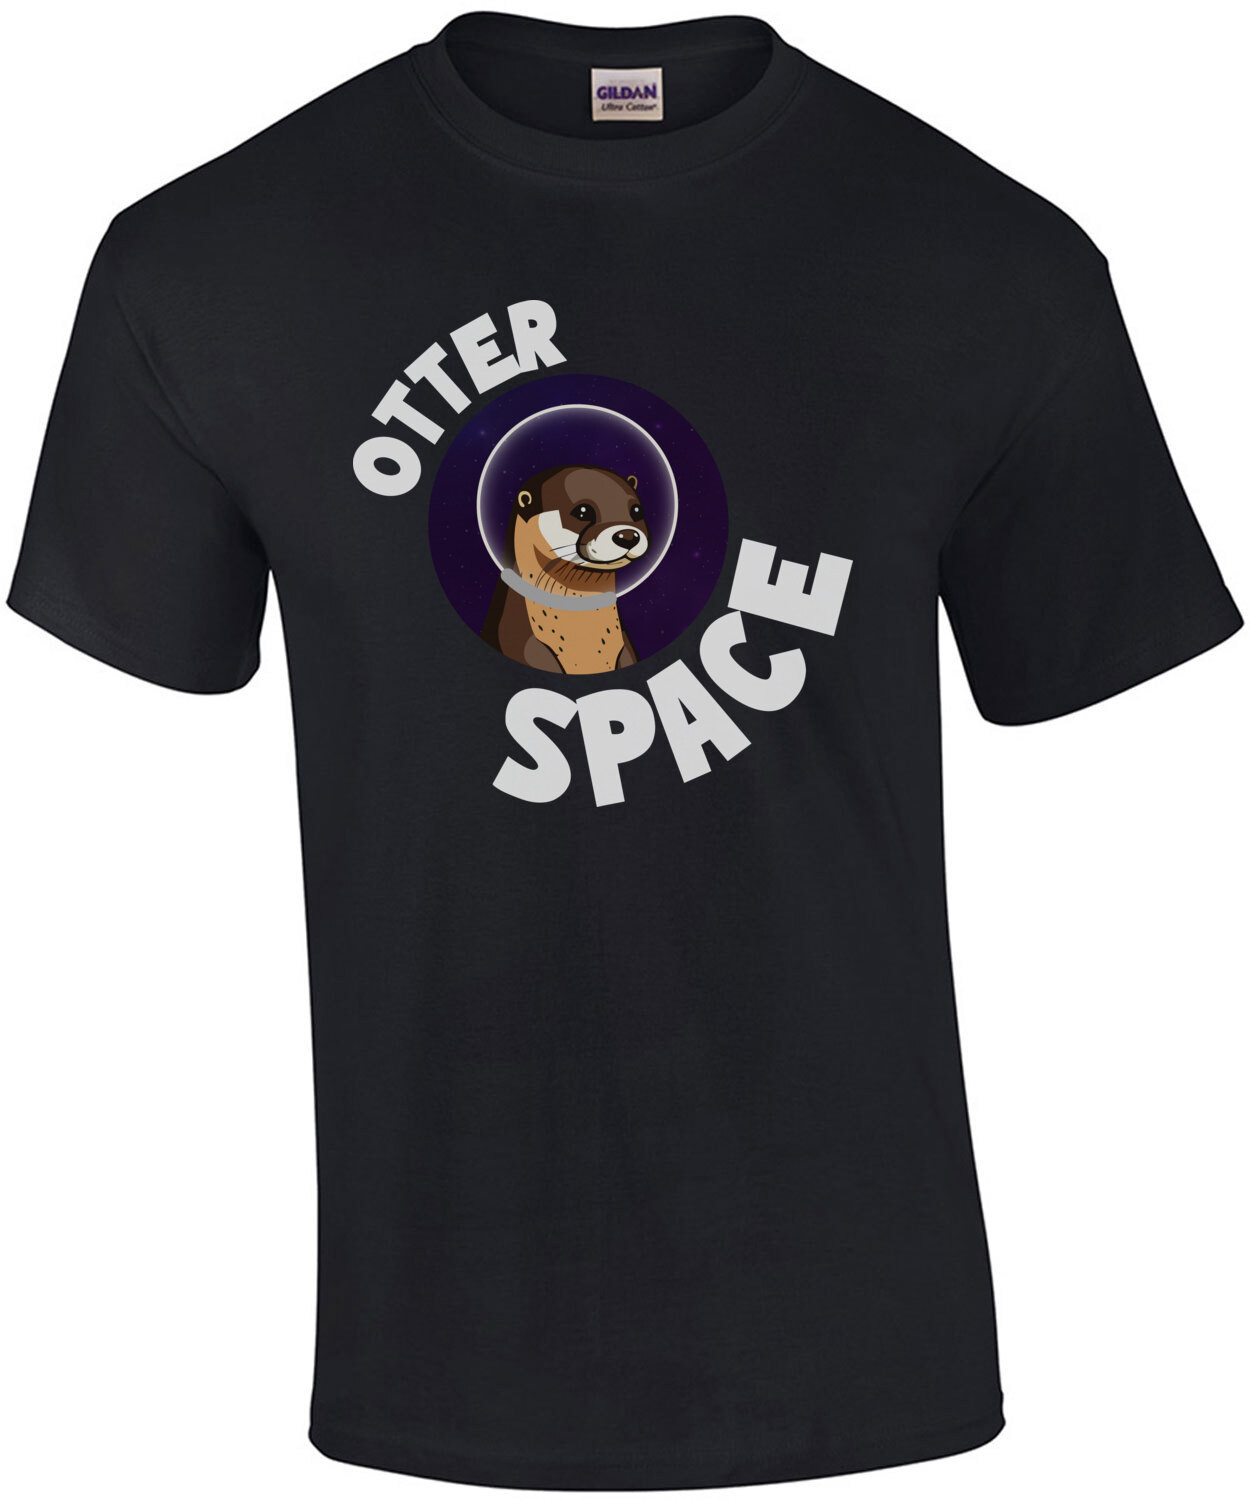 Otter Space - Funny space pun t-shirt